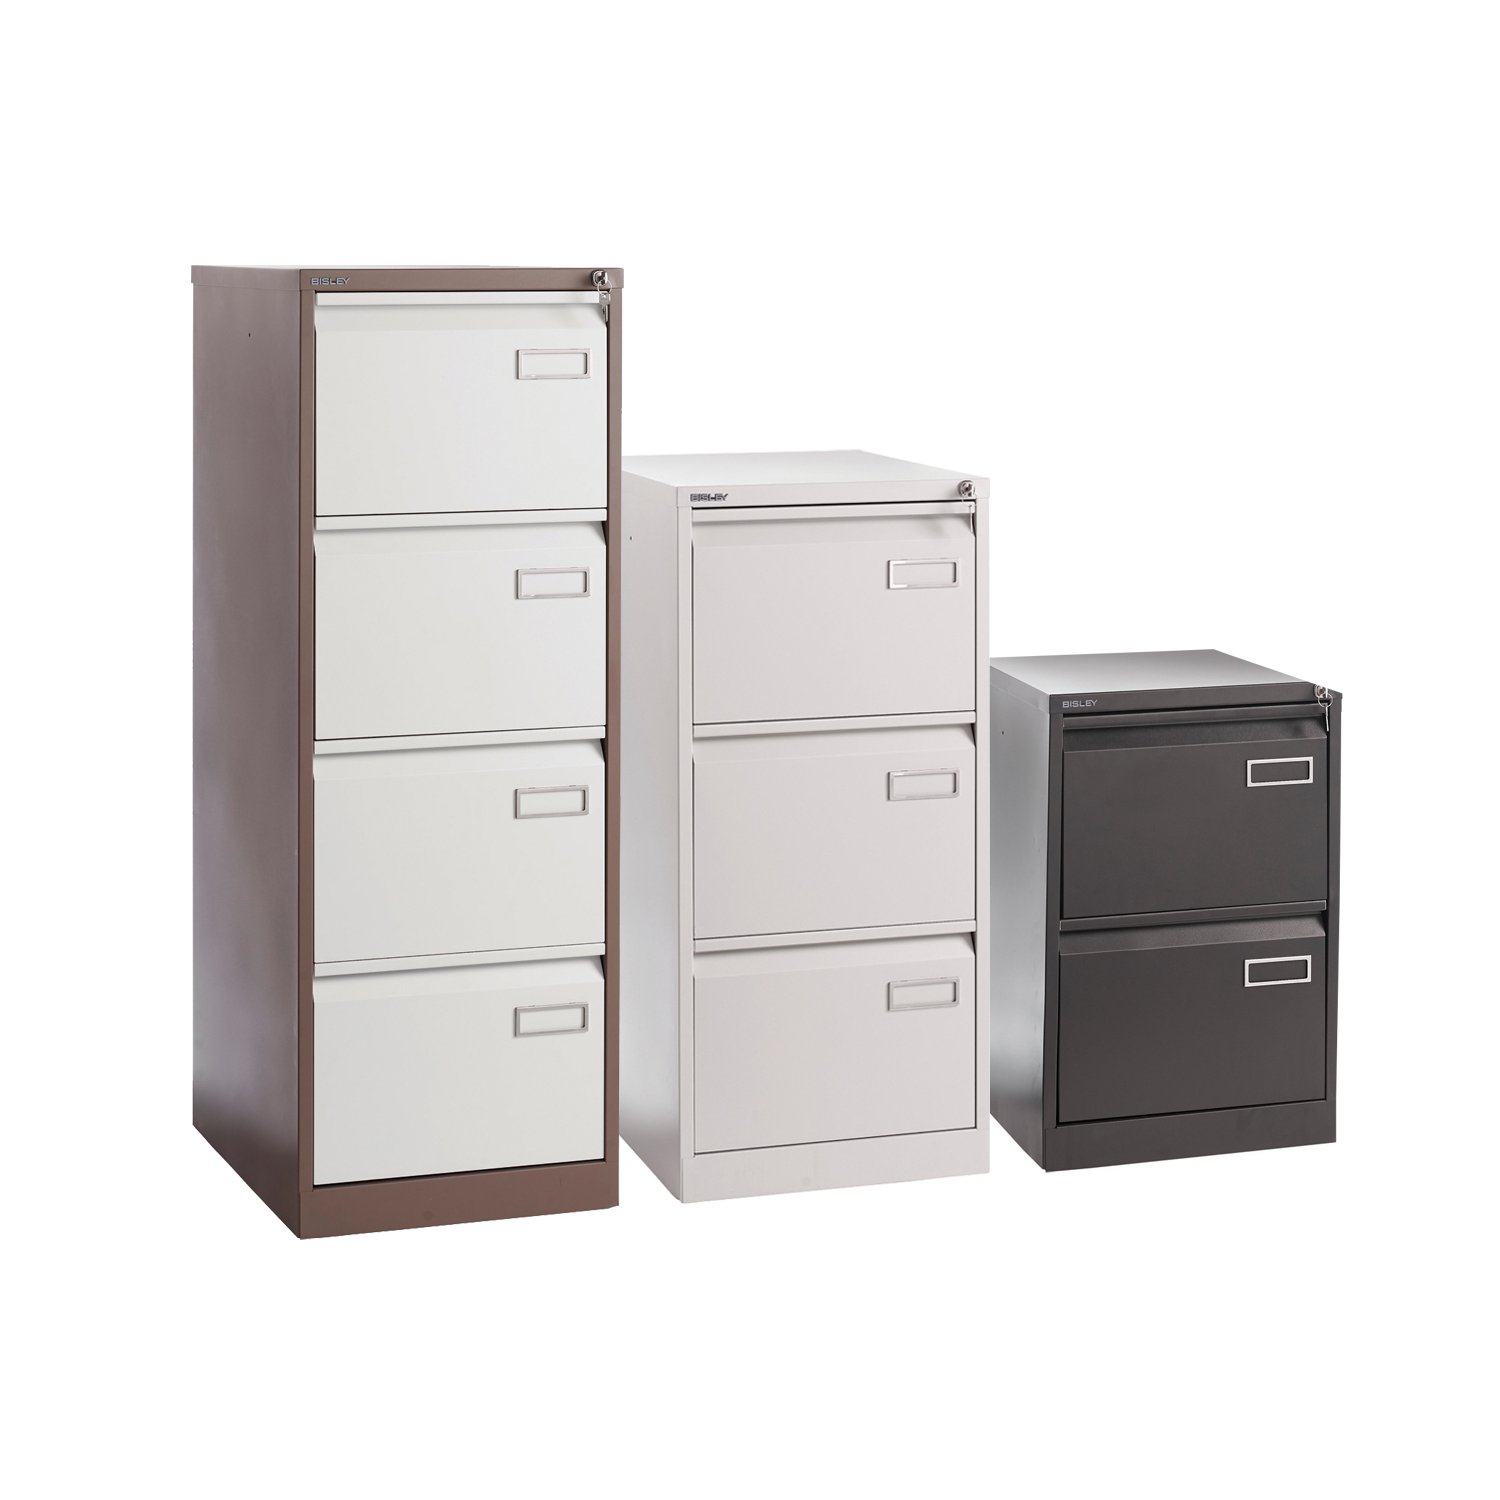 Executive Filing Cabinet, Silver